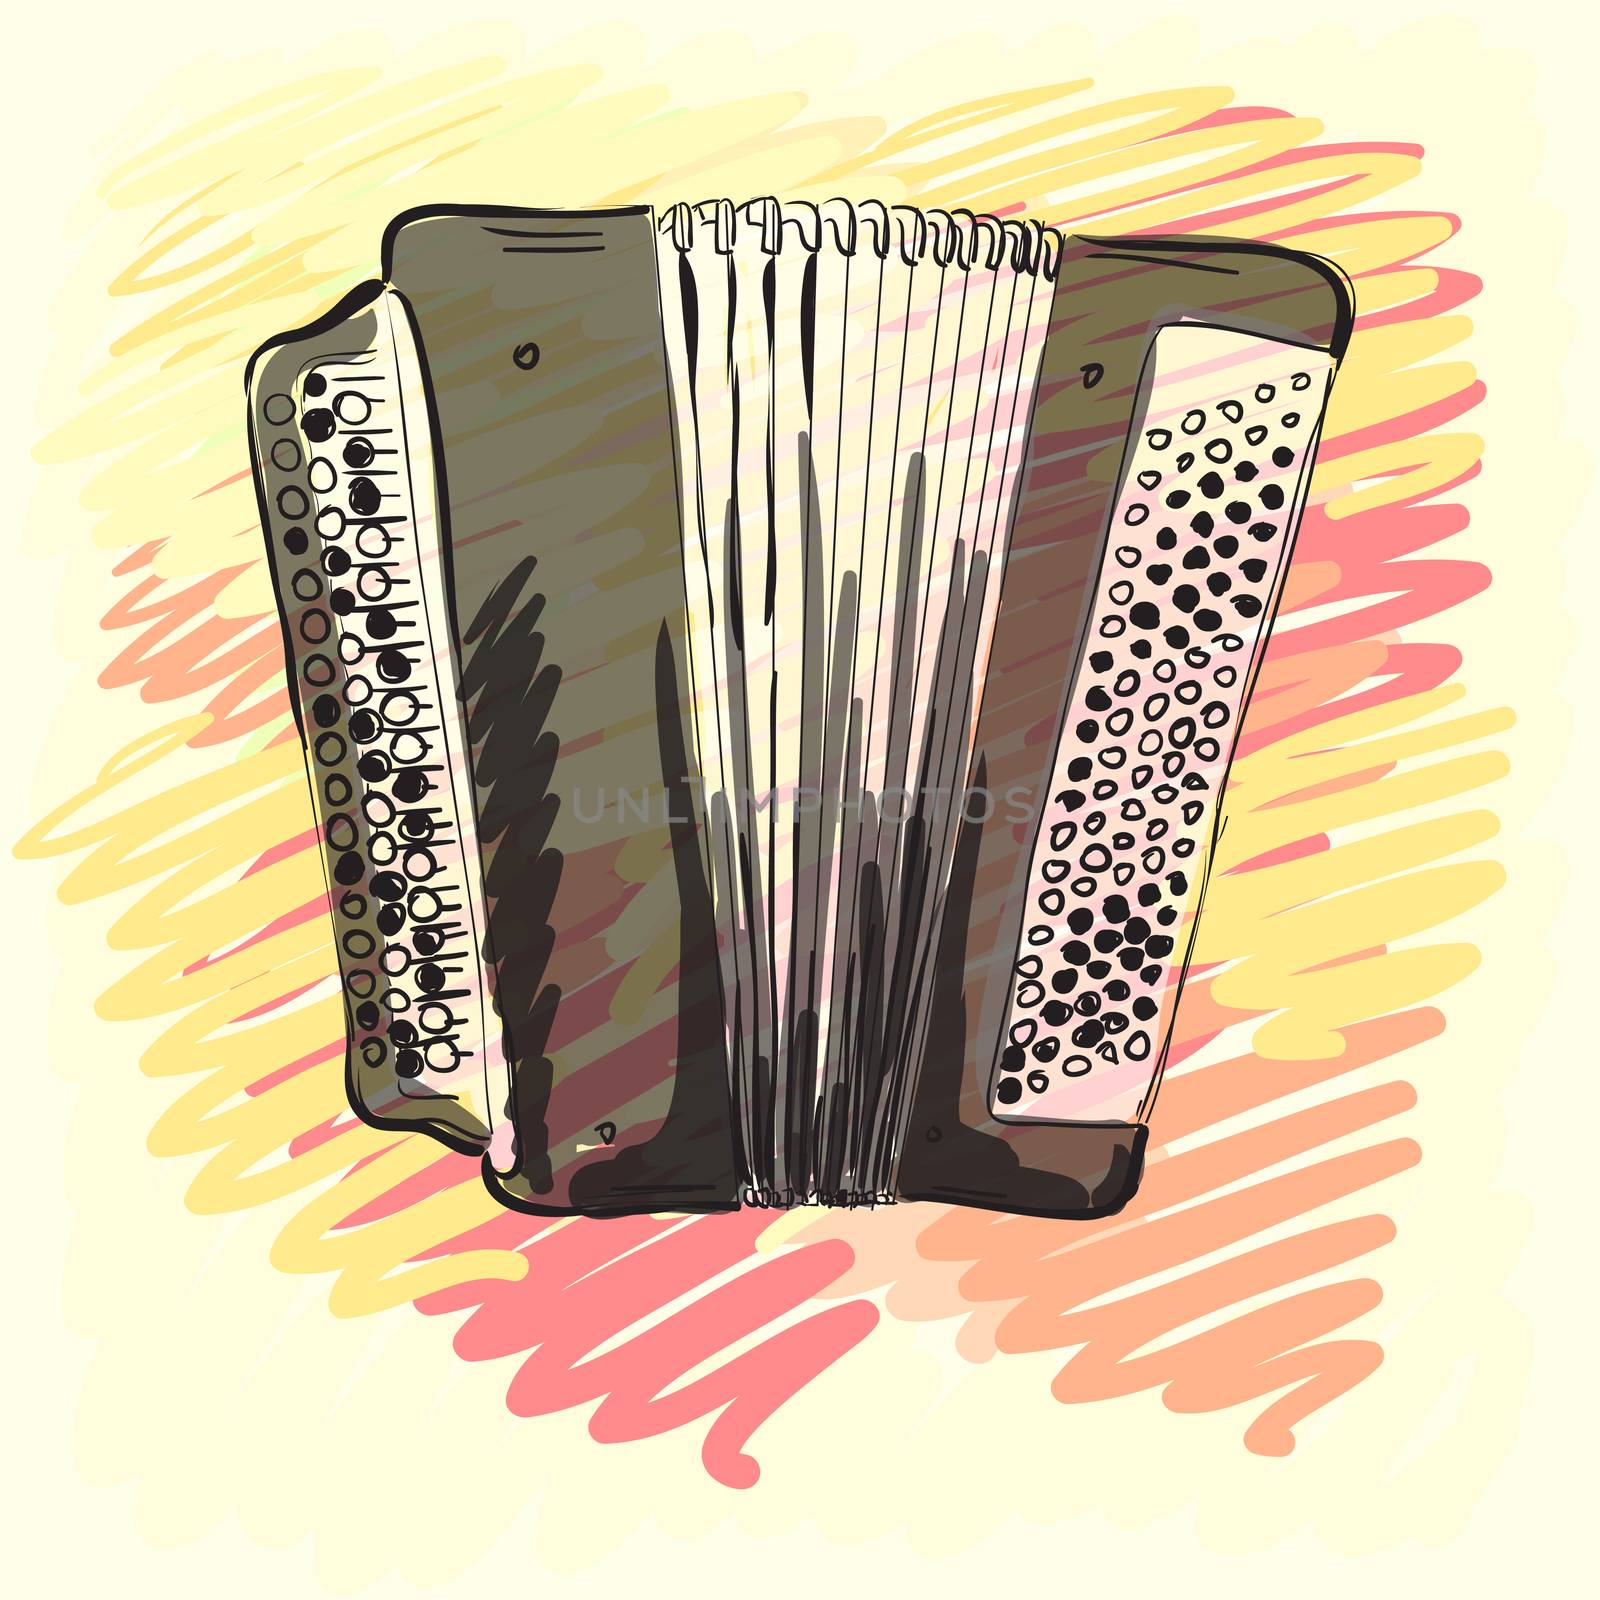 Musical instrument. Classical bayan, accordion. Corporate identity sketch. by Adamchuk